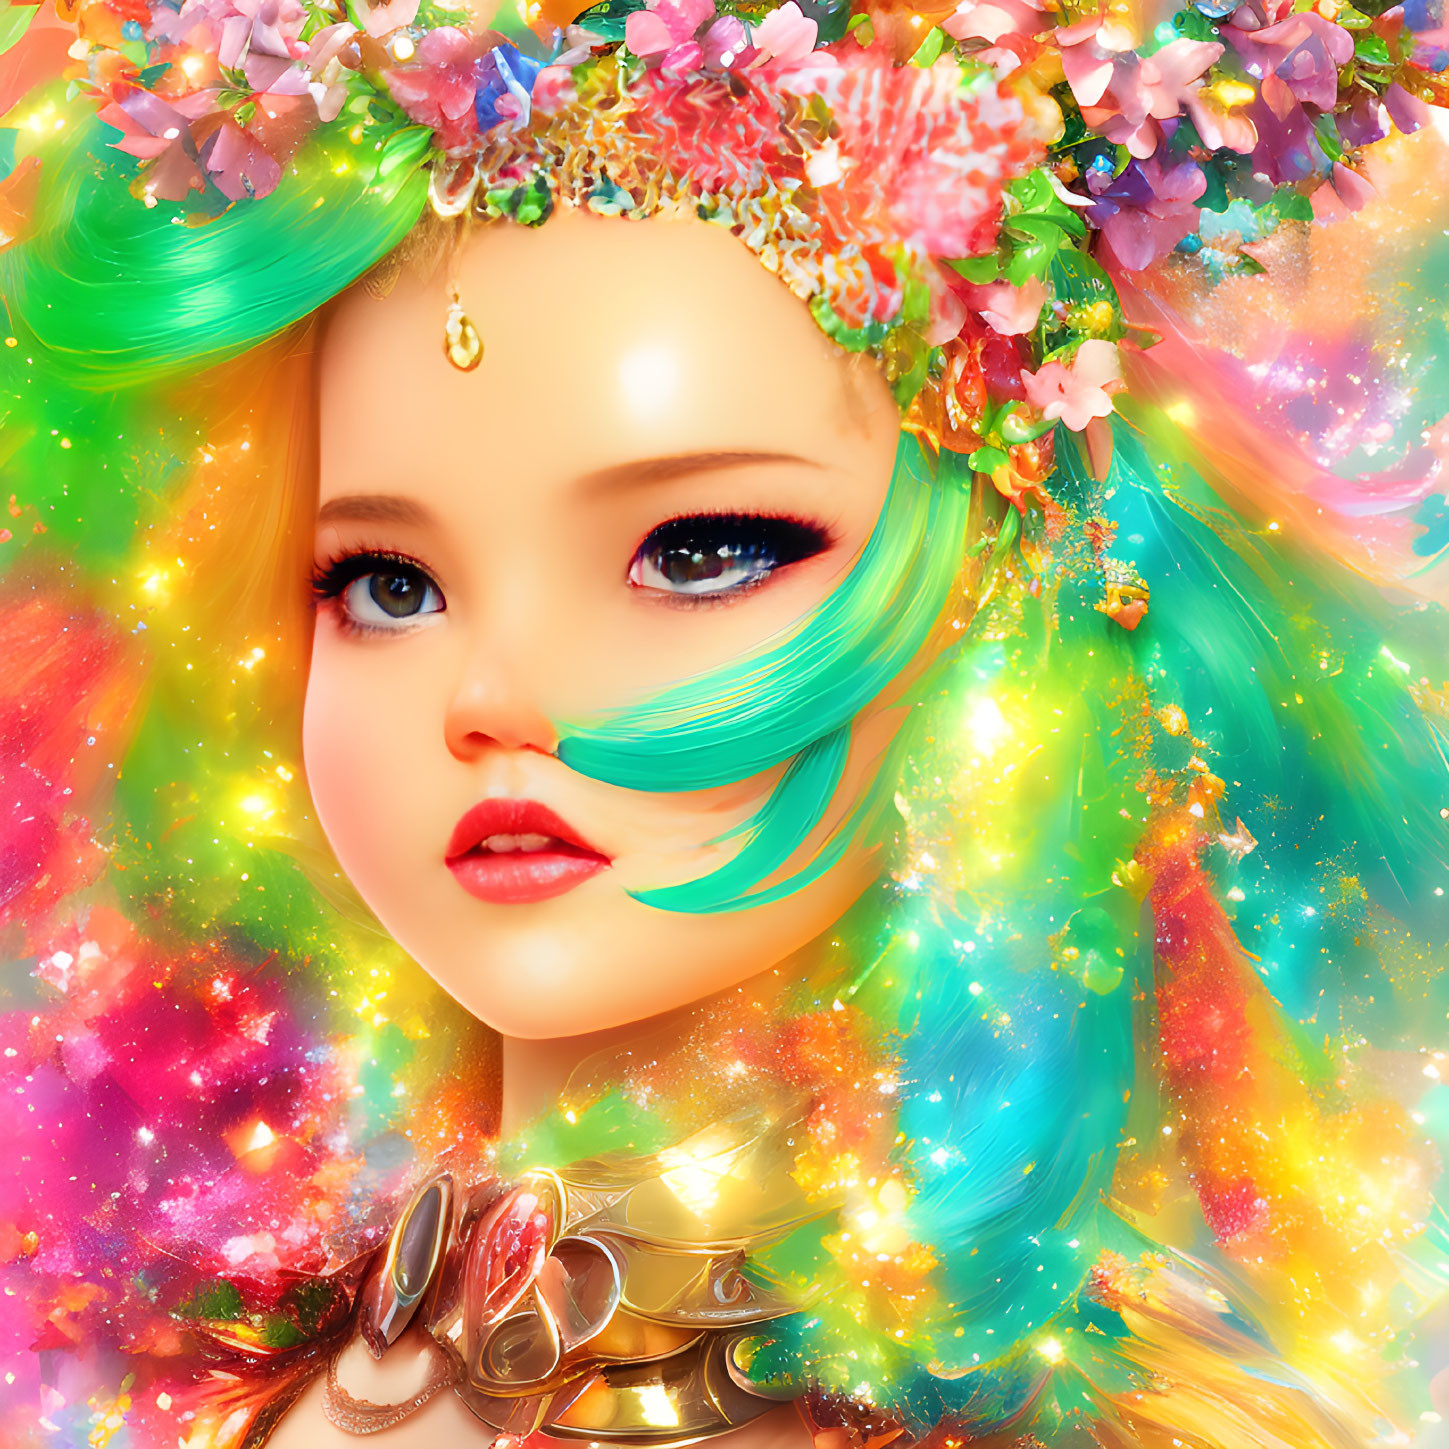 Colorful illustration of girl with multicolored hair and floral headband in vibrant setting